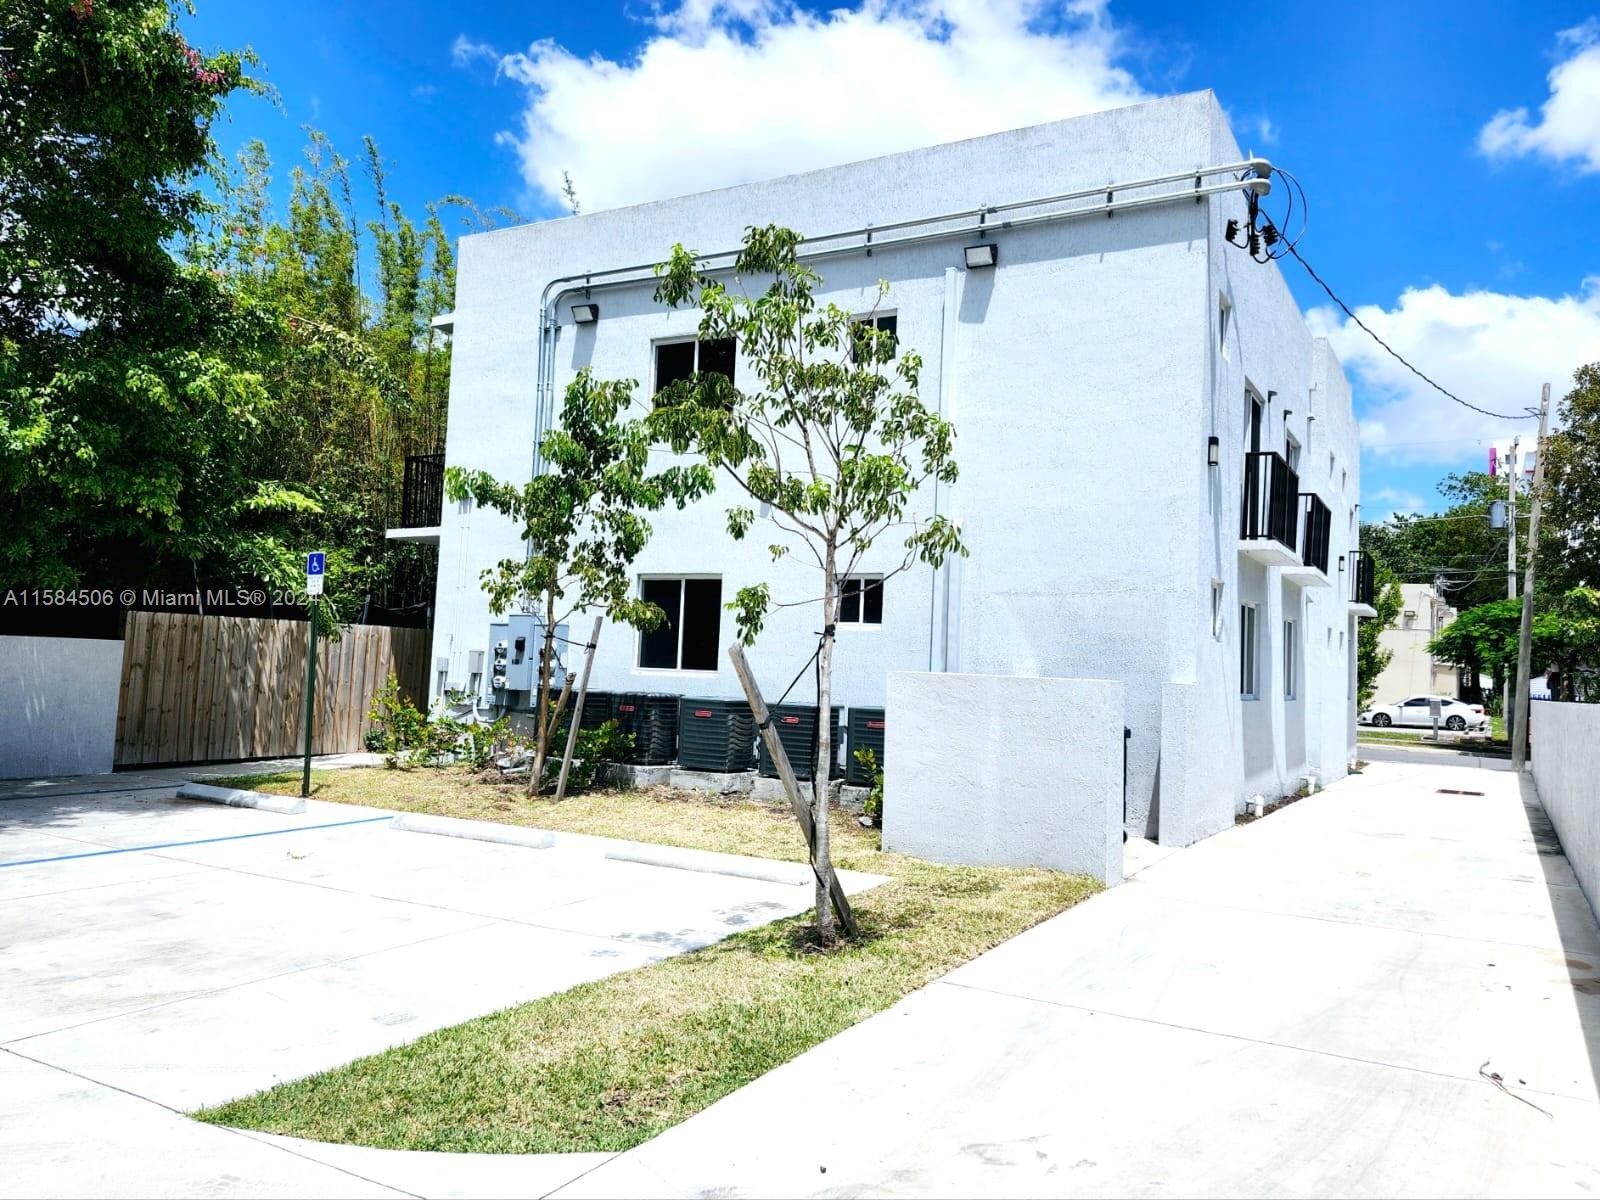 18. 580 NW 34th St